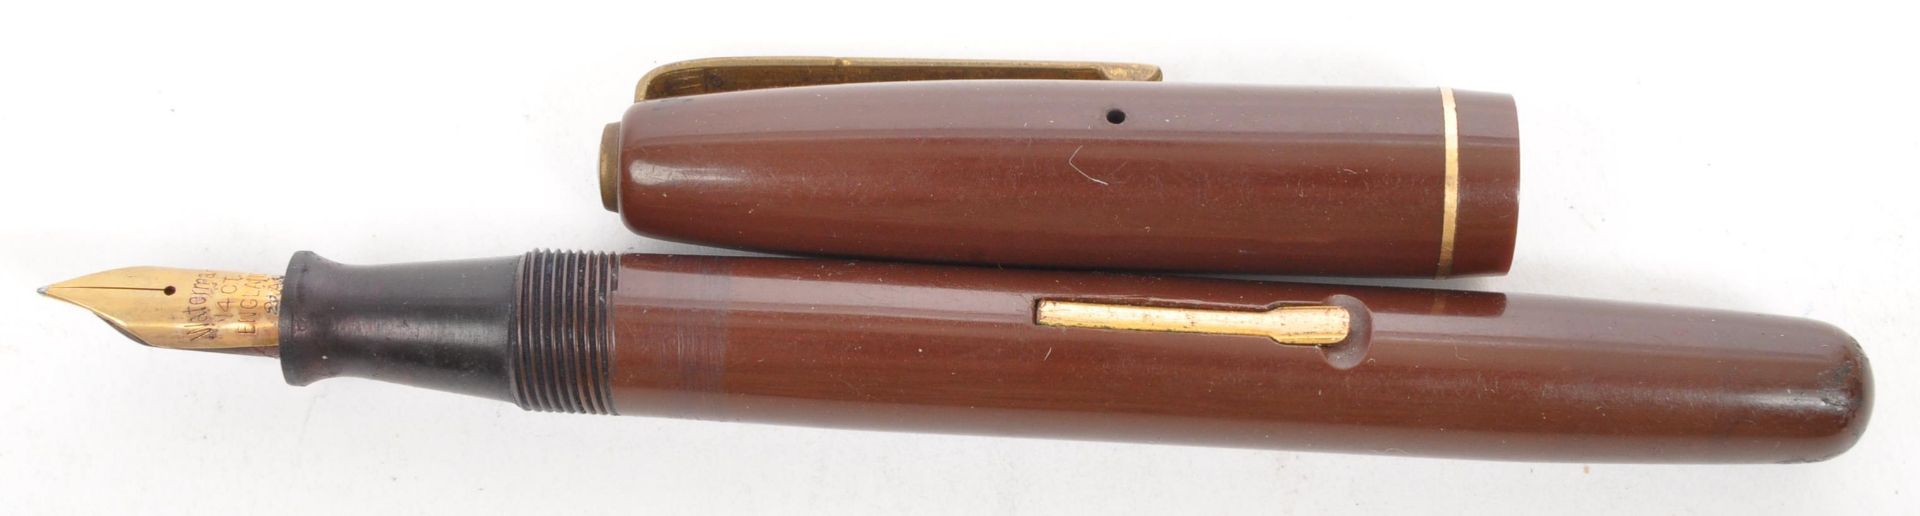 THREE VINTAGE FOUNTAIN PENS BY ONOTO / WATERMANS & WYVERN - Image 6 of 7